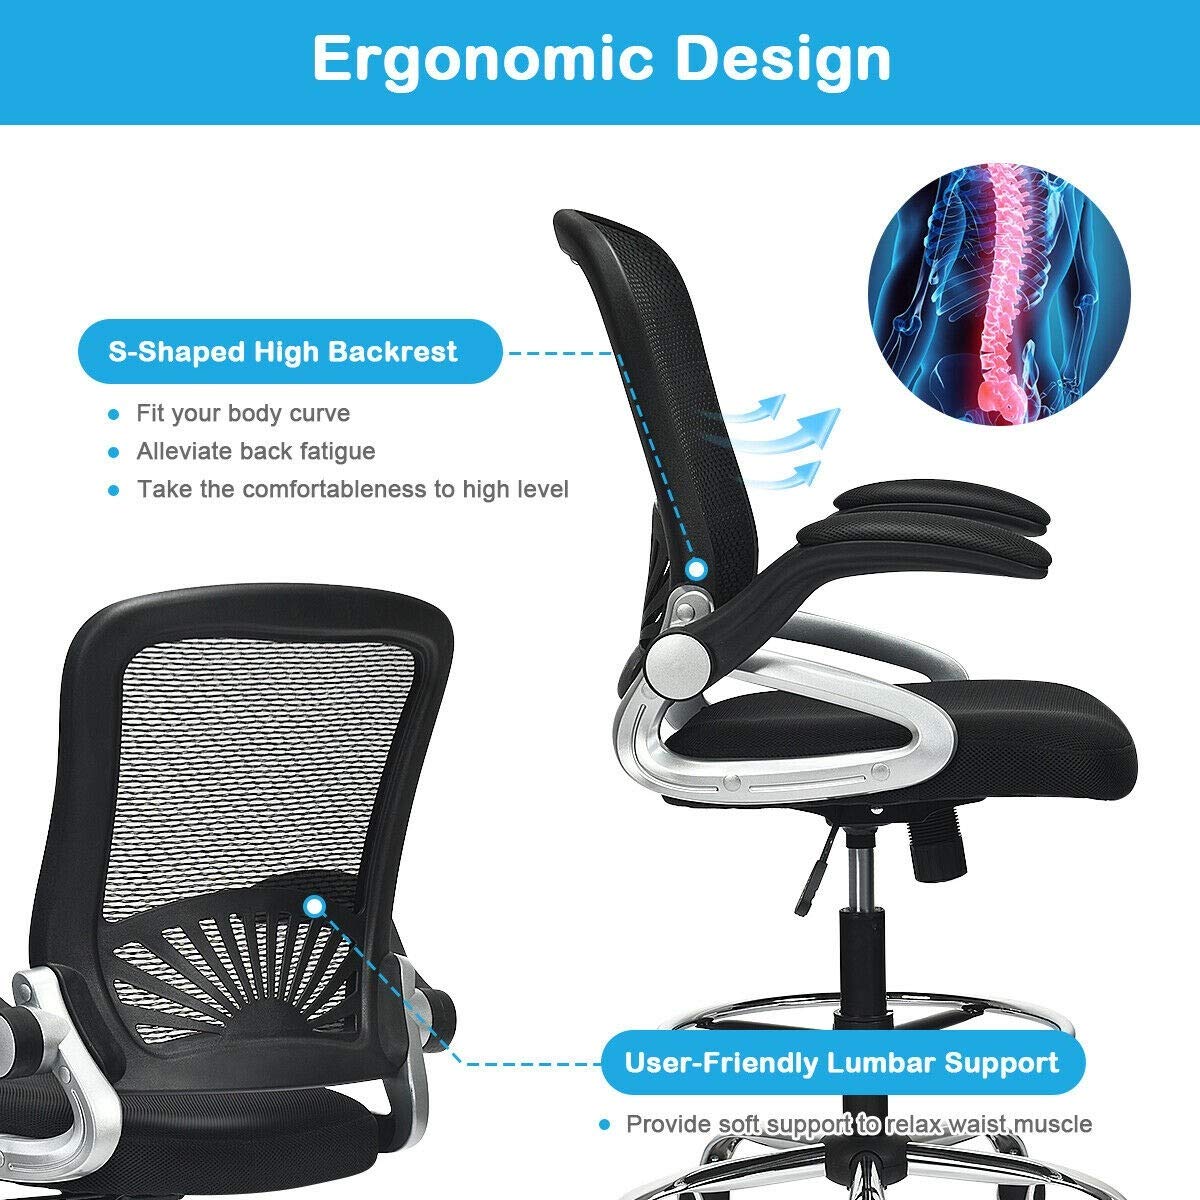 POWERSTONE Drafting Chair, Tall Office Chair for Standing Desk with Footrest and Flip-Up Armrests Ergonomic Adjustable Height Stool Computer Chair